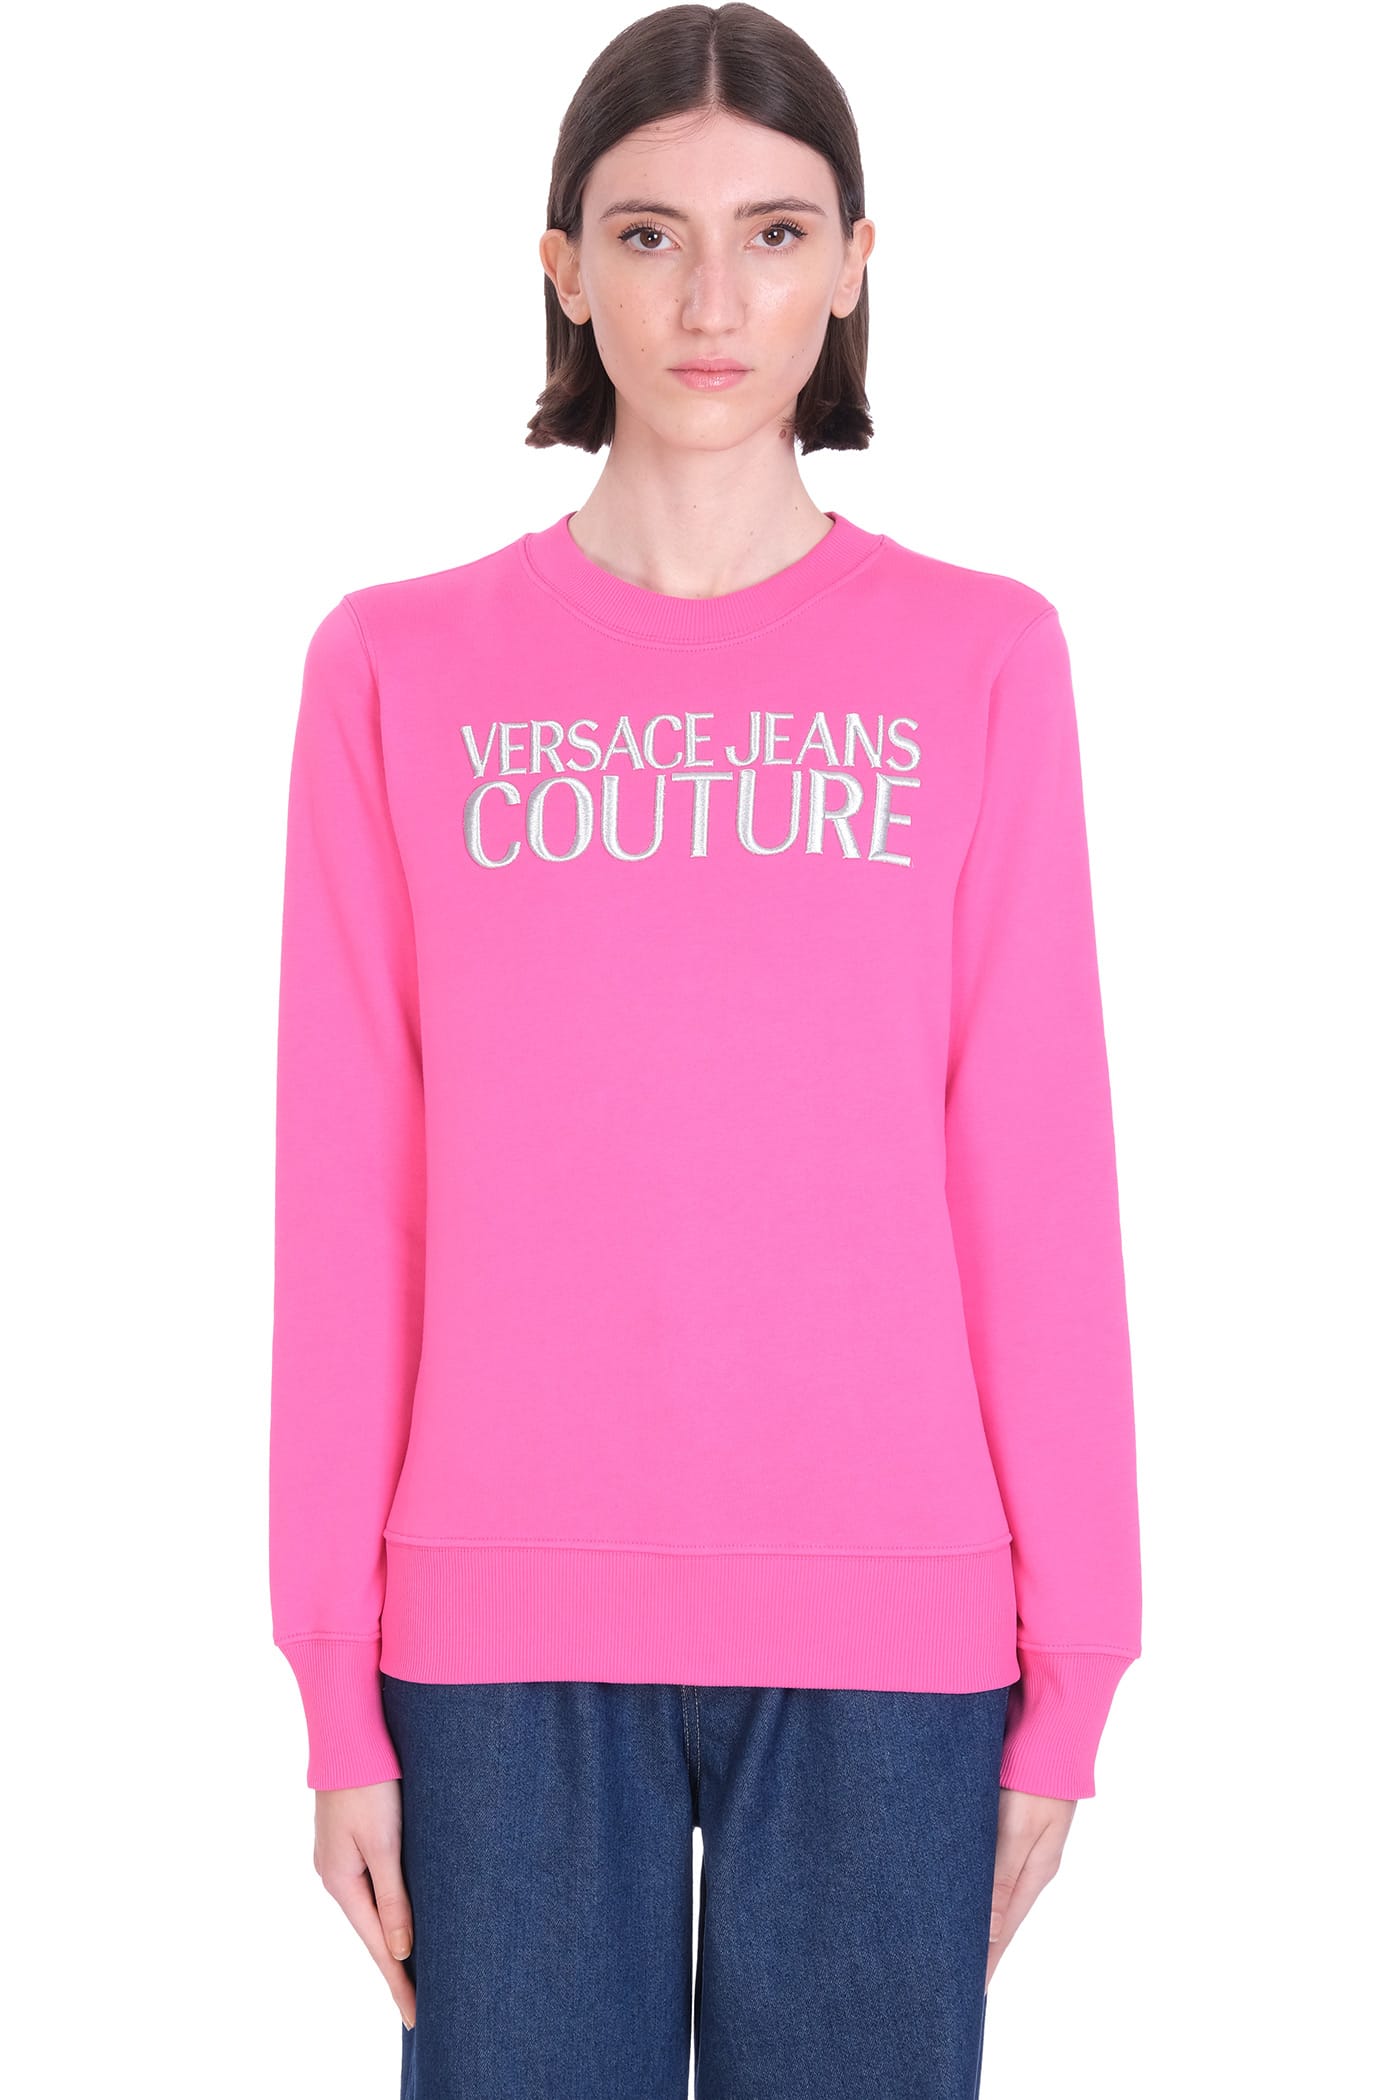 Versace Jeans Couture Sweatshirt In Rose-pink Cotton